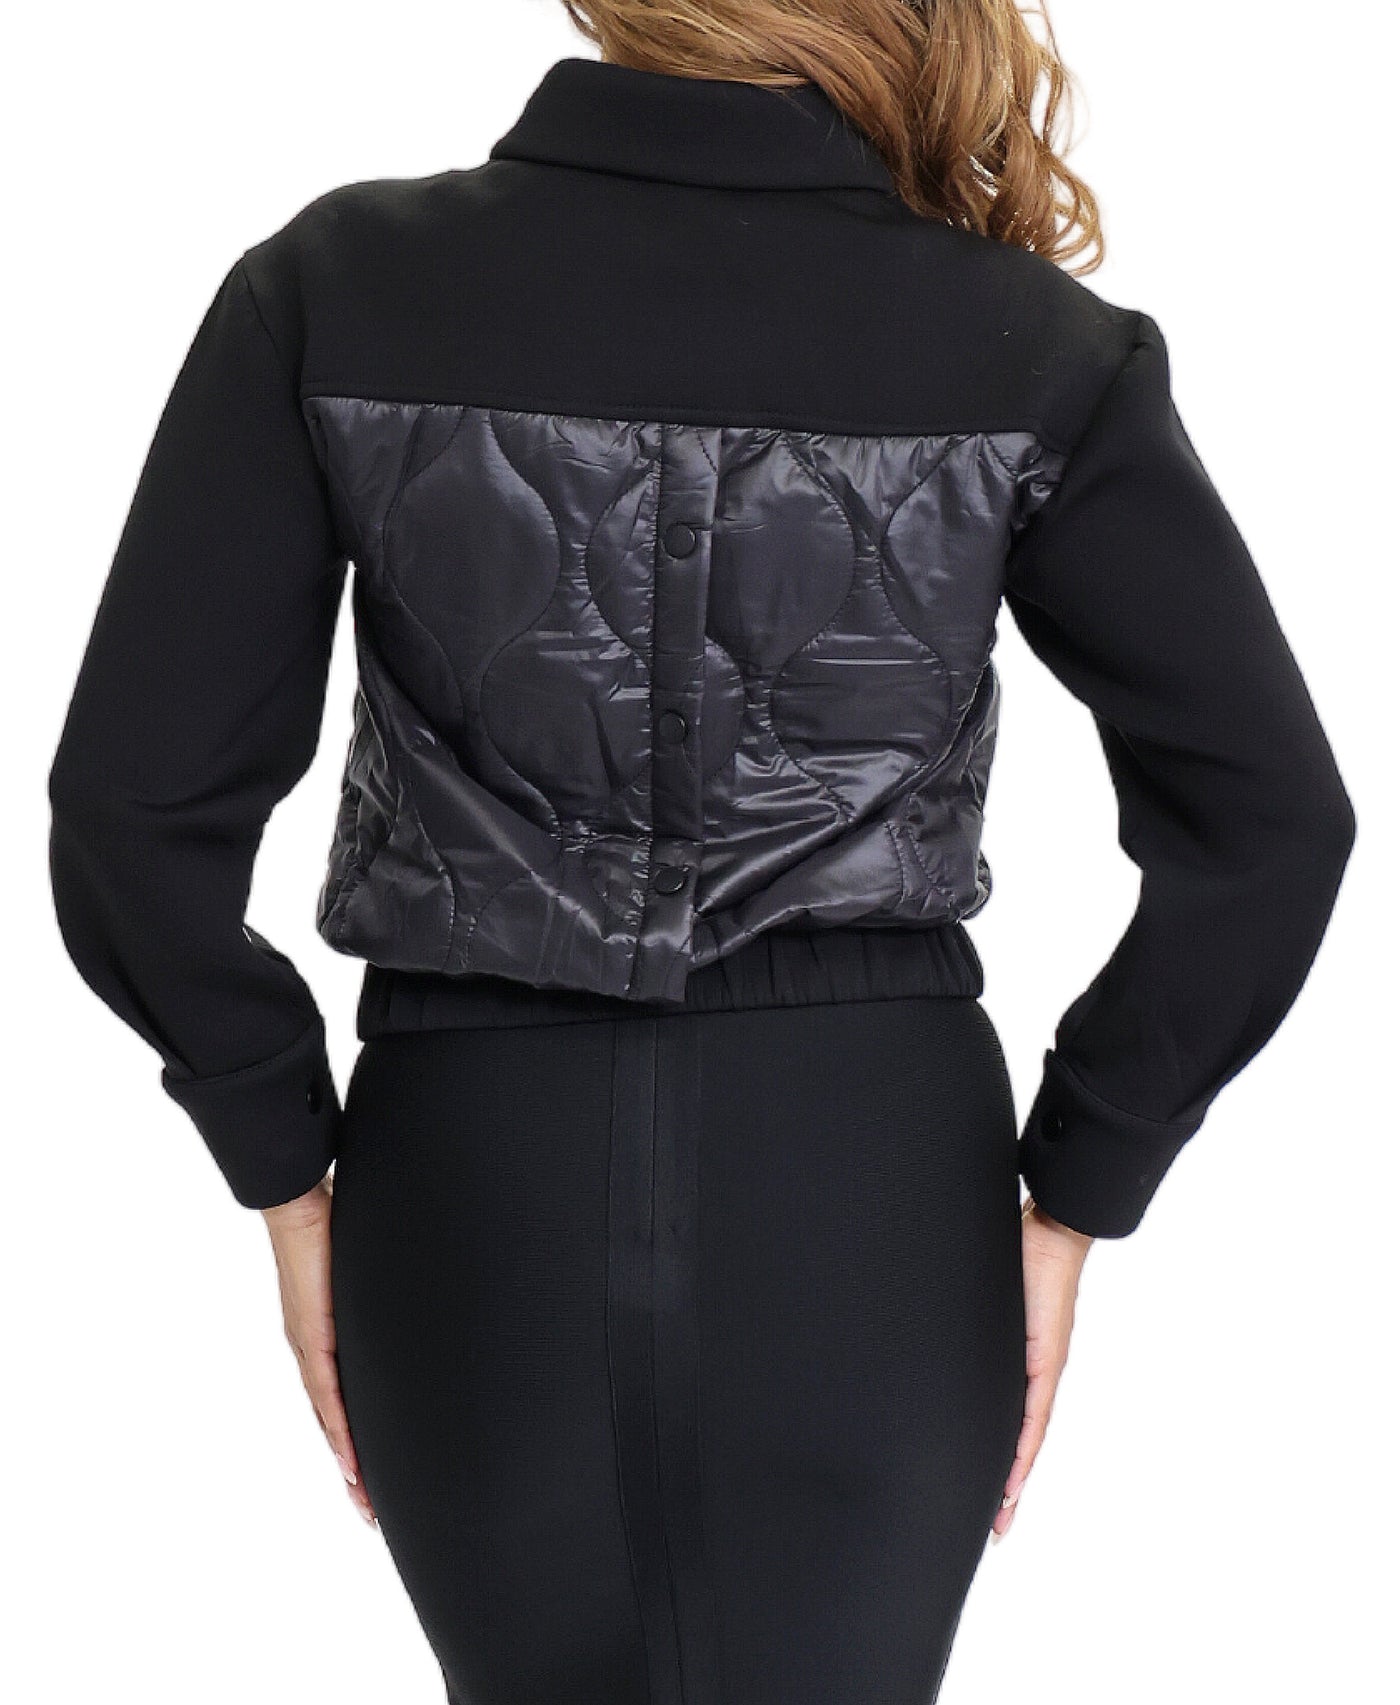 Scuba Bomber Jacket w/ Quilted Detail image 2